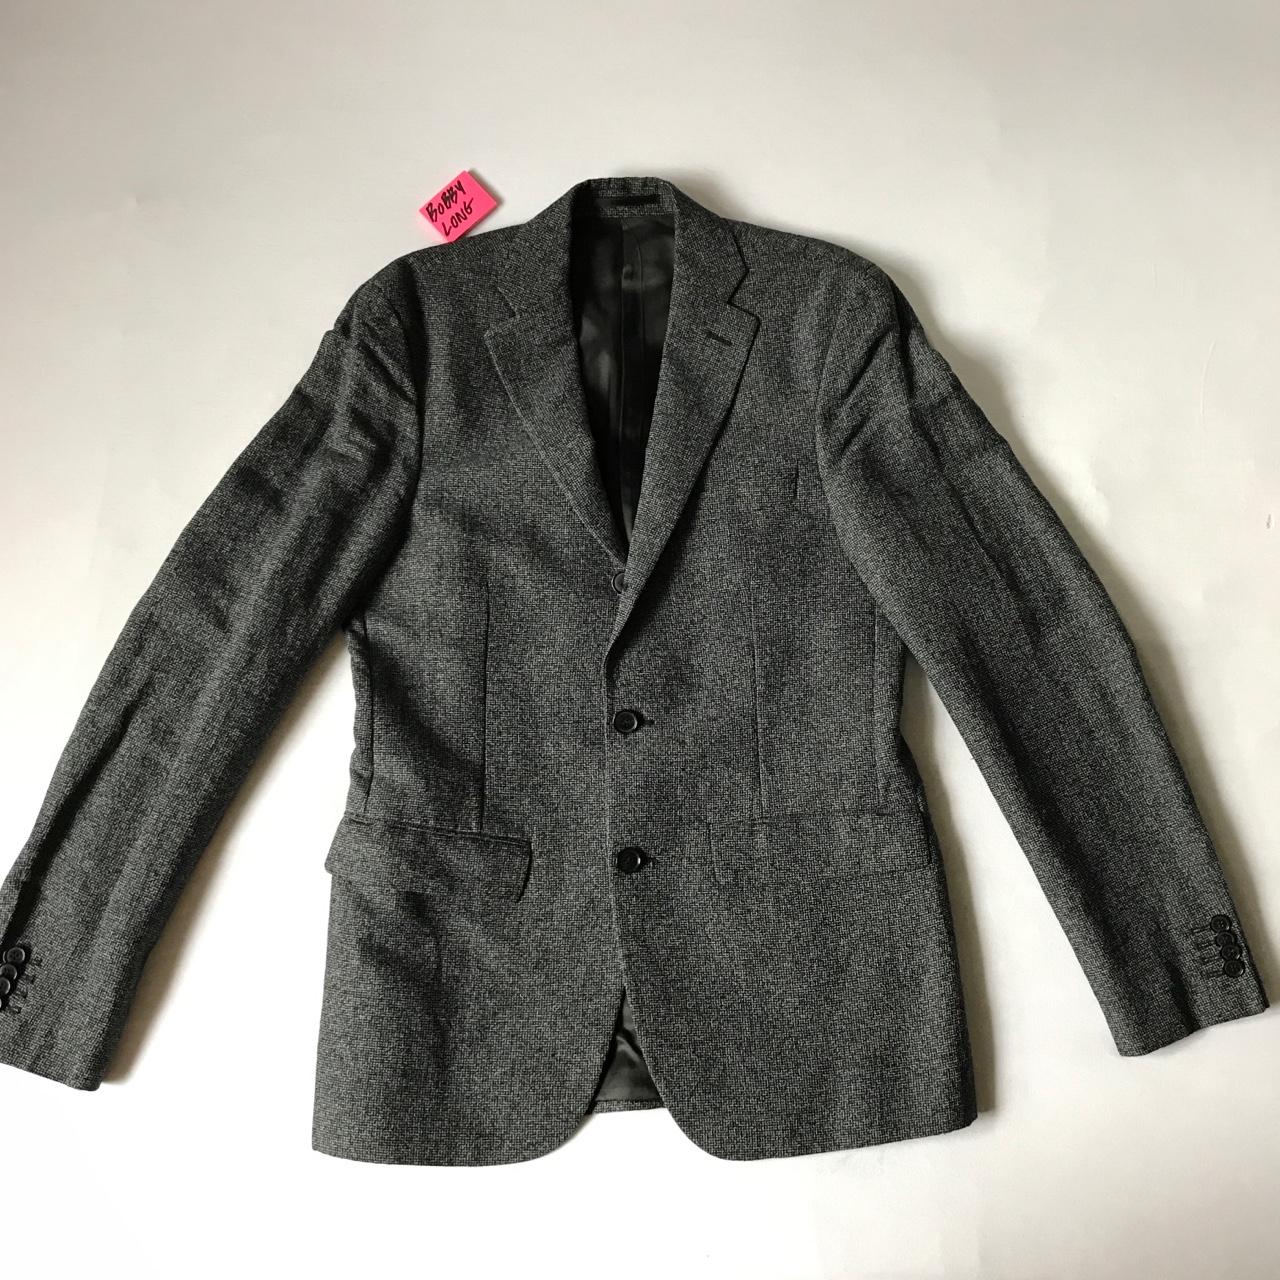 Only worn once Acne Studios Drifter Suit size... - Depop